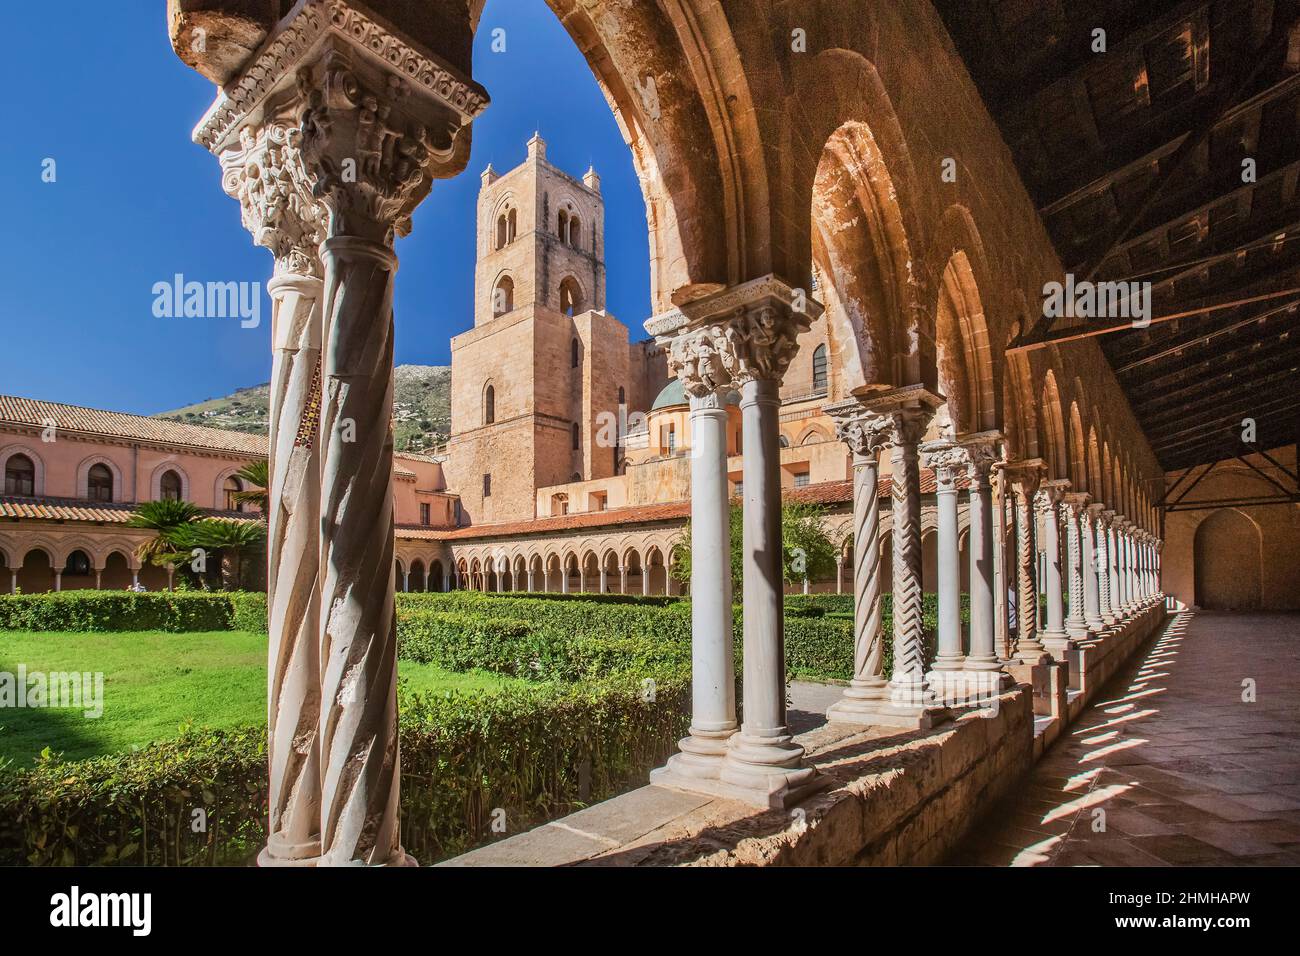 Cloister with garden of the Benedettino monastery at the cathedral with clock tower, Monreale, Sicily, Italy Stock Photo